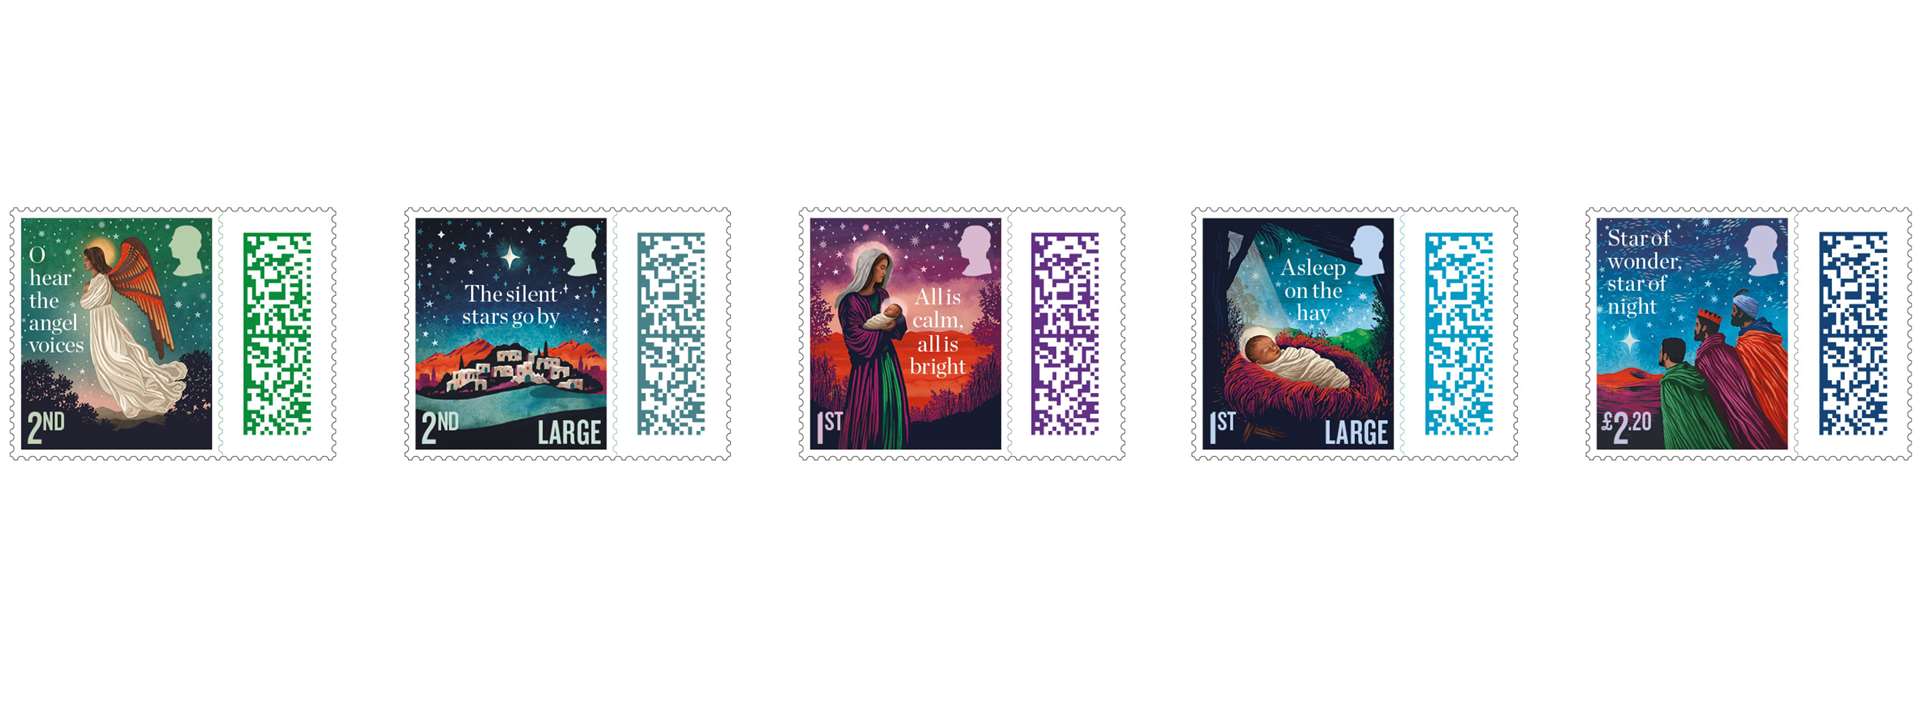 There are five stamps in the collection. Image: Royal Mail.